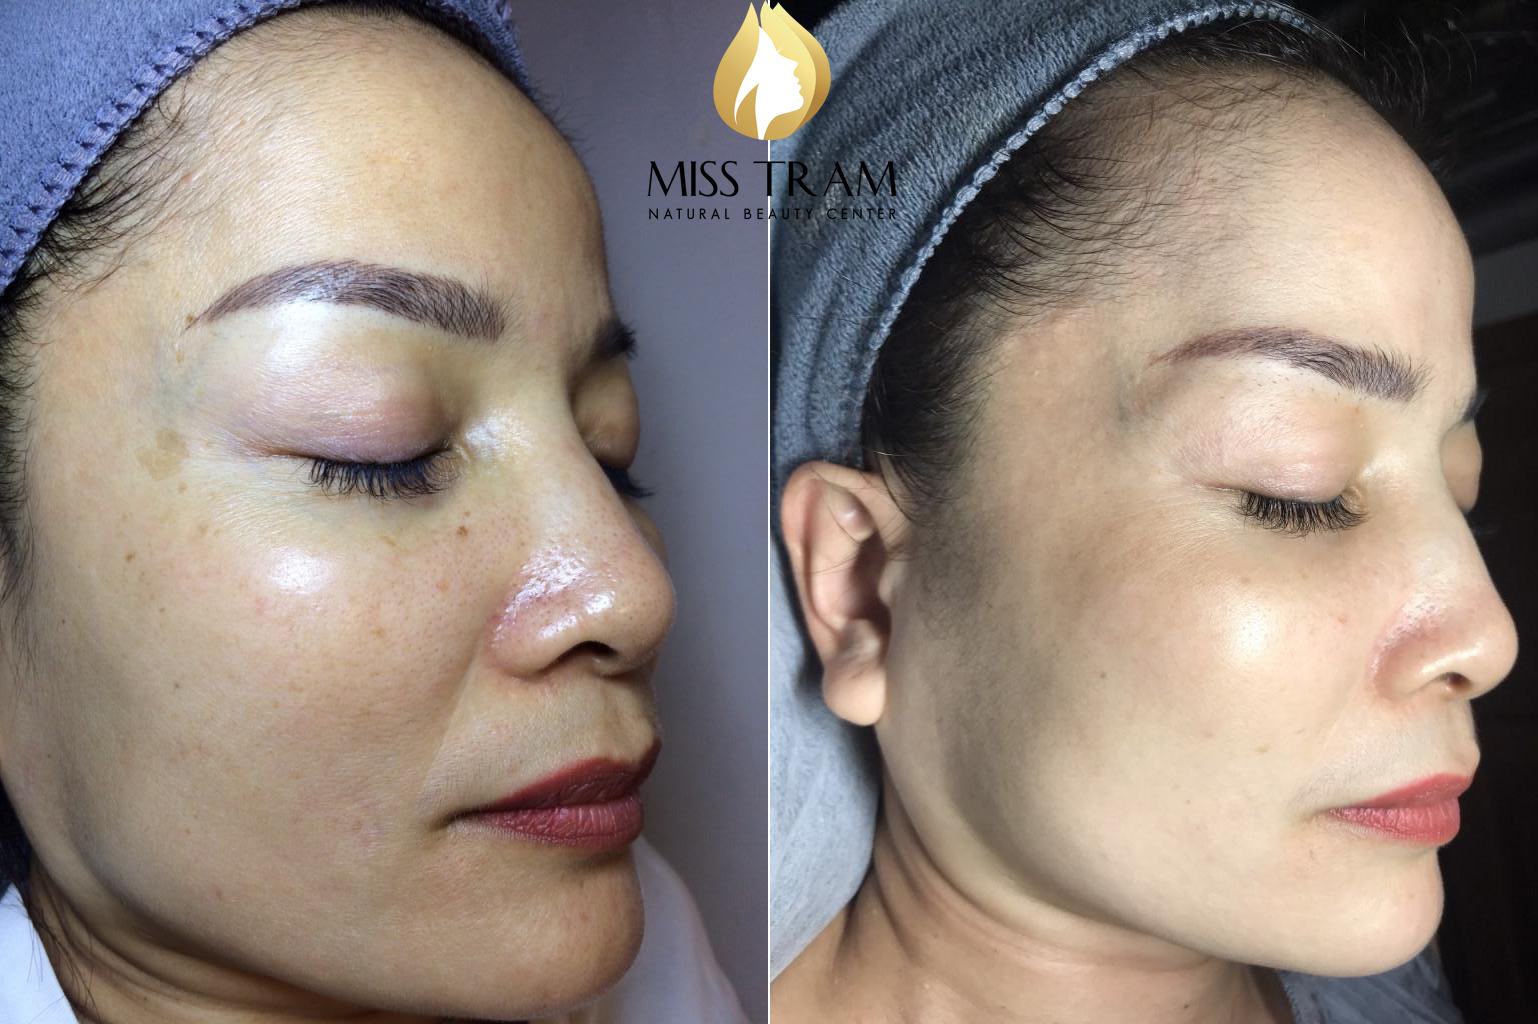 Melasma Treatment Results Before And After At Miss Tram Spa